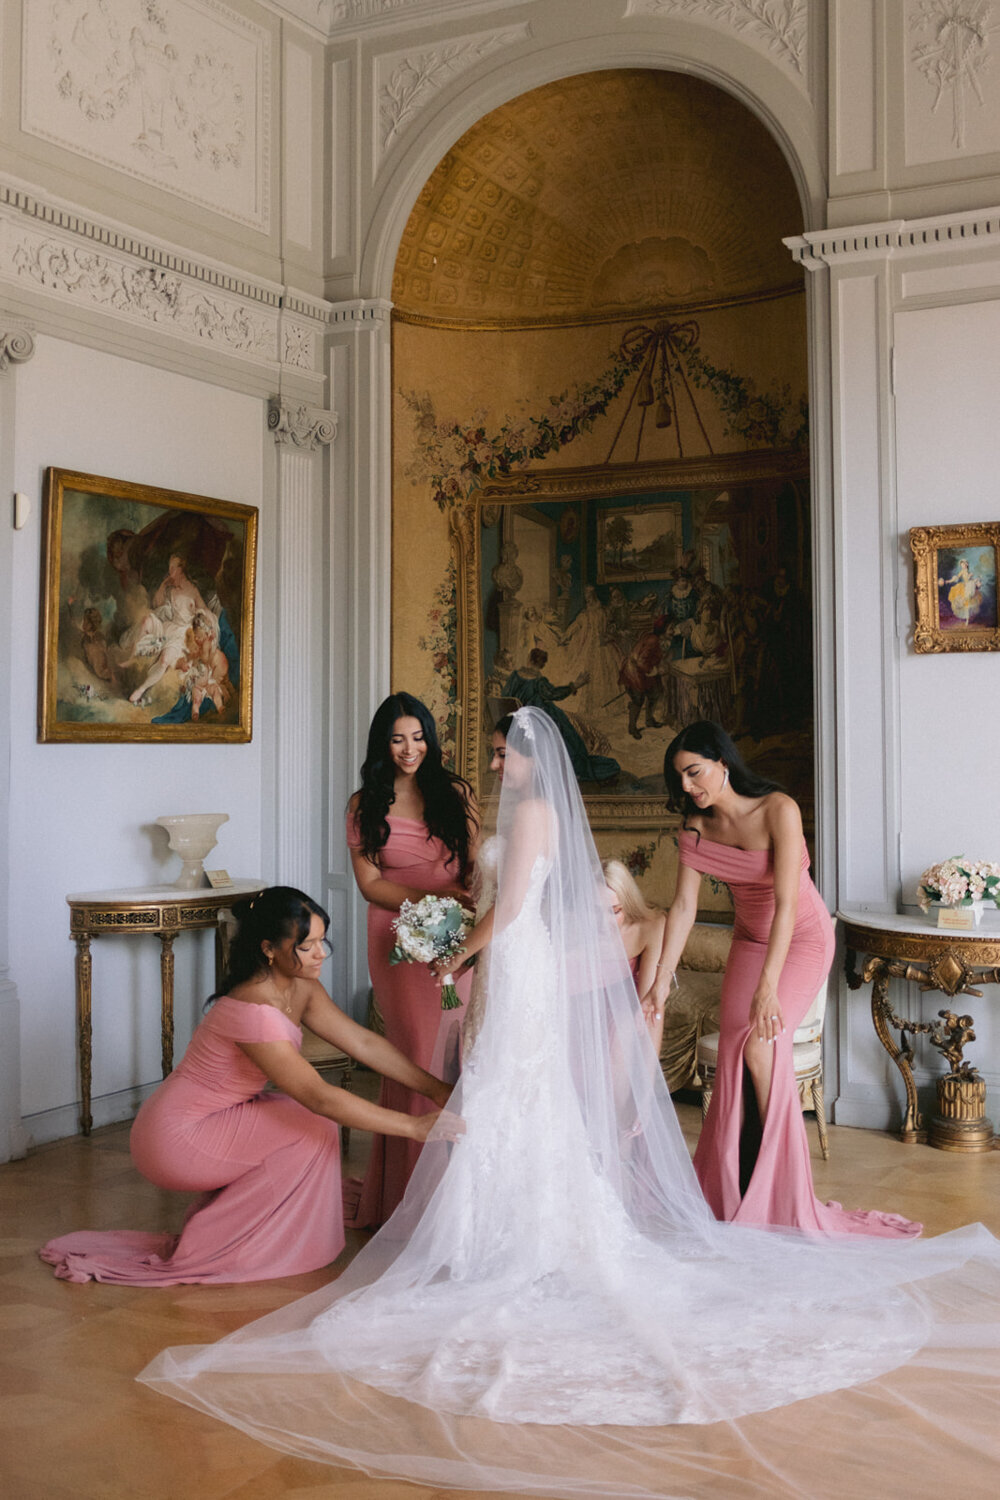 American Wedding Photographer in Provence and French Riviera